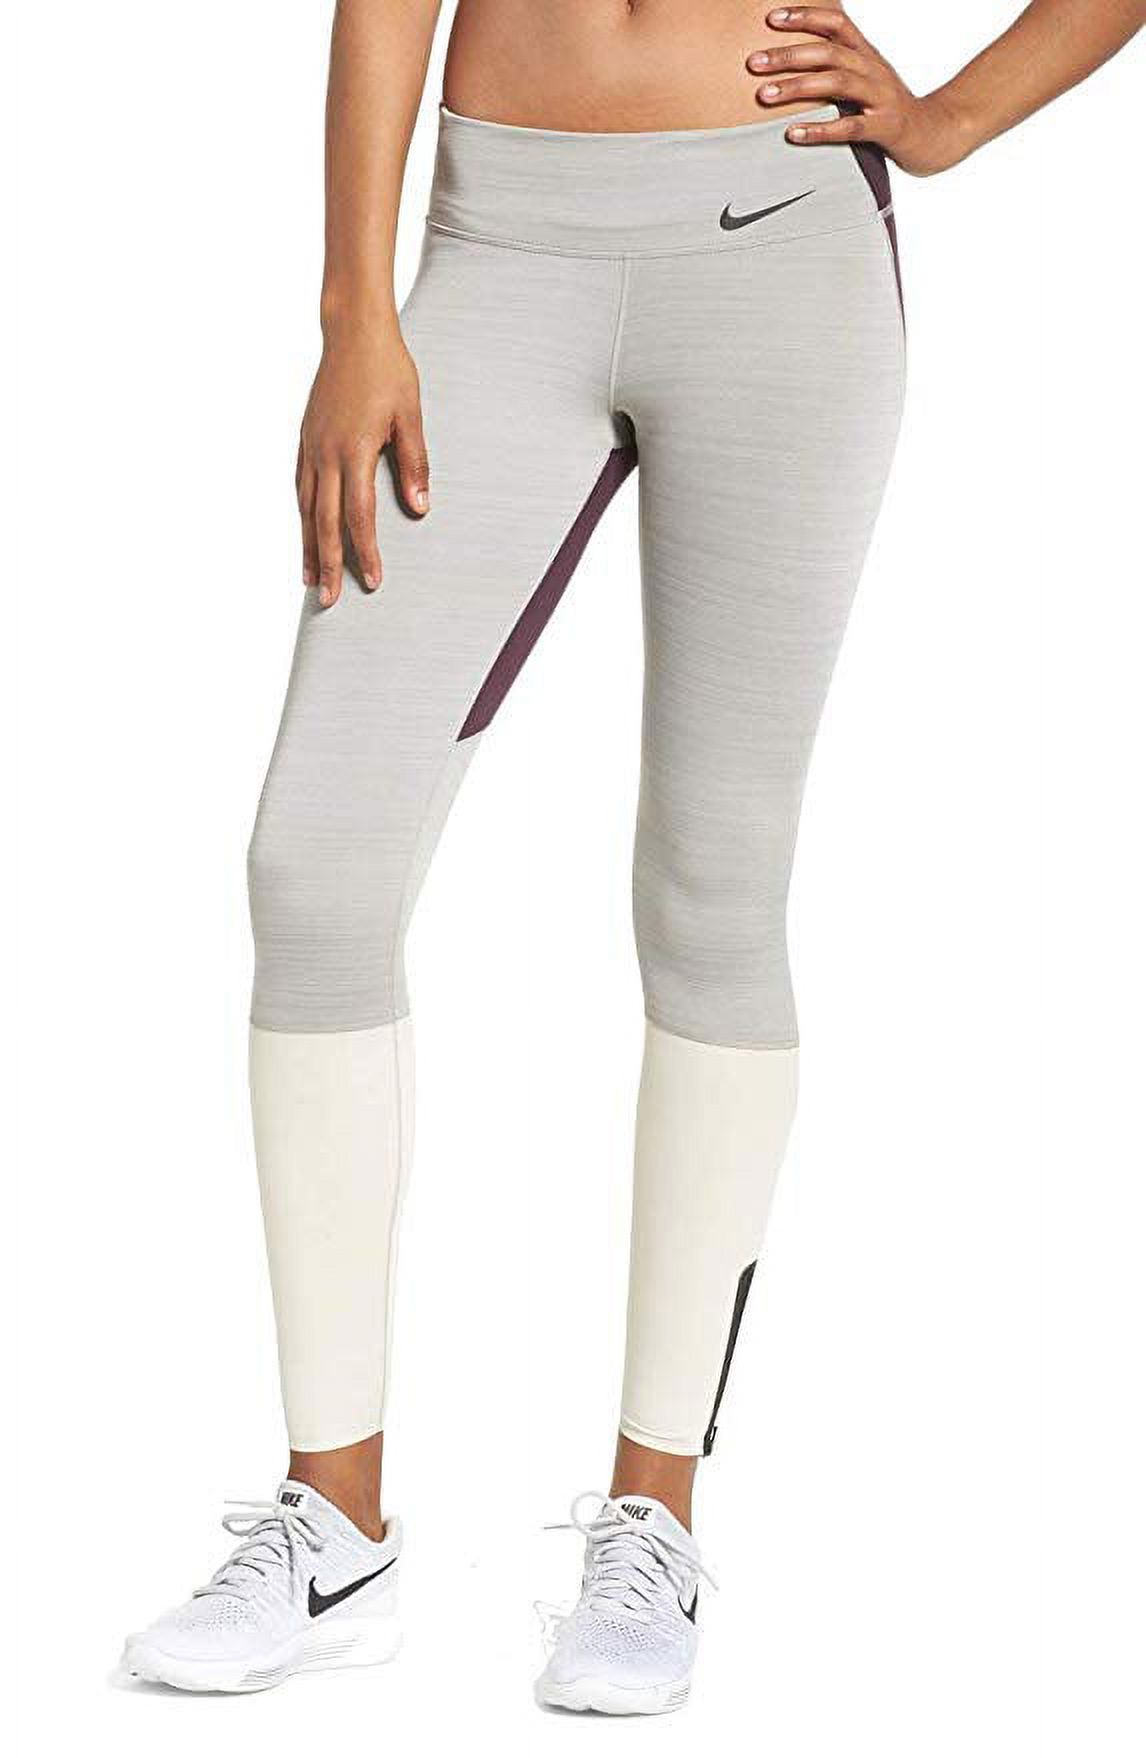 Nike Womens Legendary Mid Rise Zip Cuff Training Tights - image 1 of 3